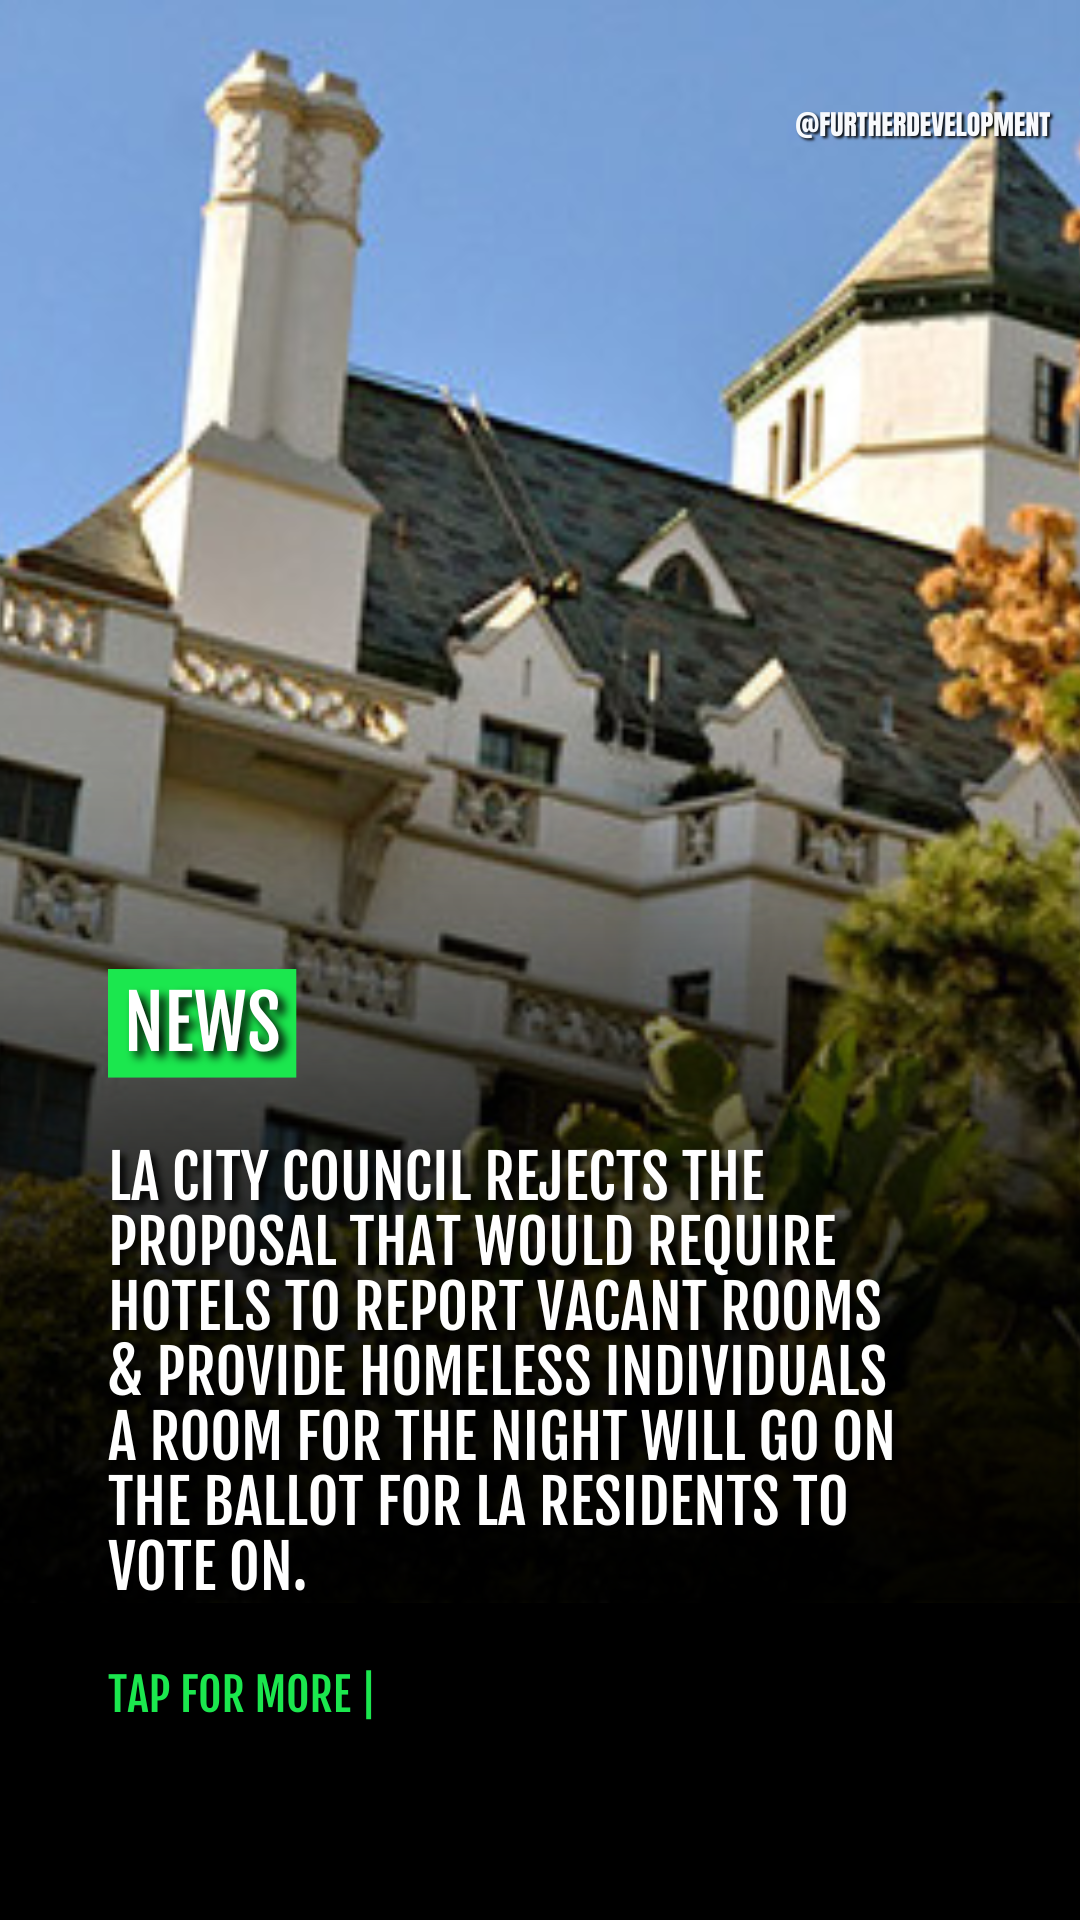 LA city council rejects the proposal that would require hotels to report vacant rooms & provide homeless individuals a room for the night will go on the ballot for LA residents to vote on.